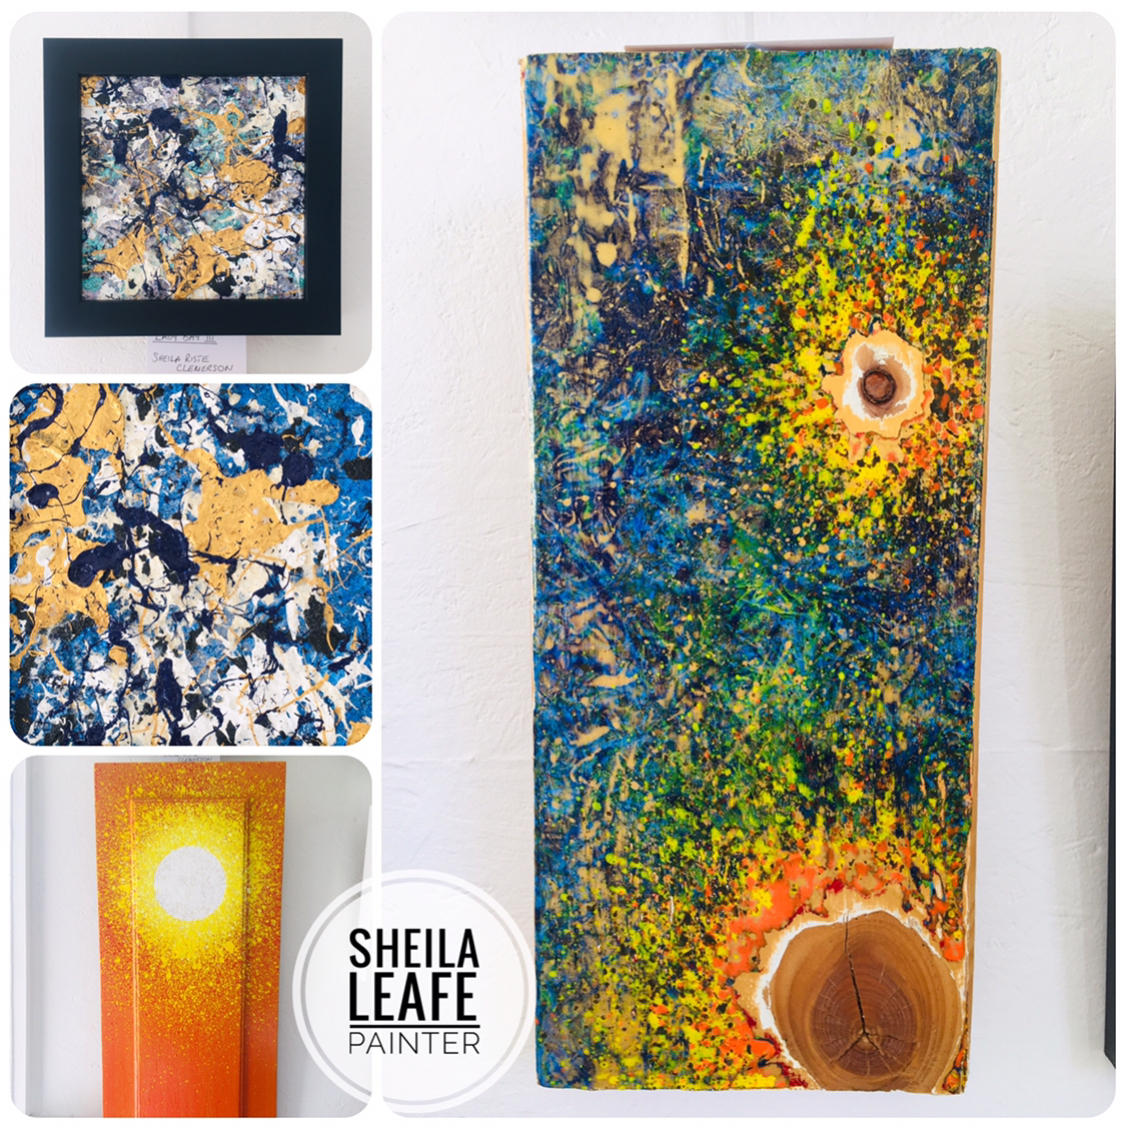 The Mull of Gallery – Shelia Leafe Painter